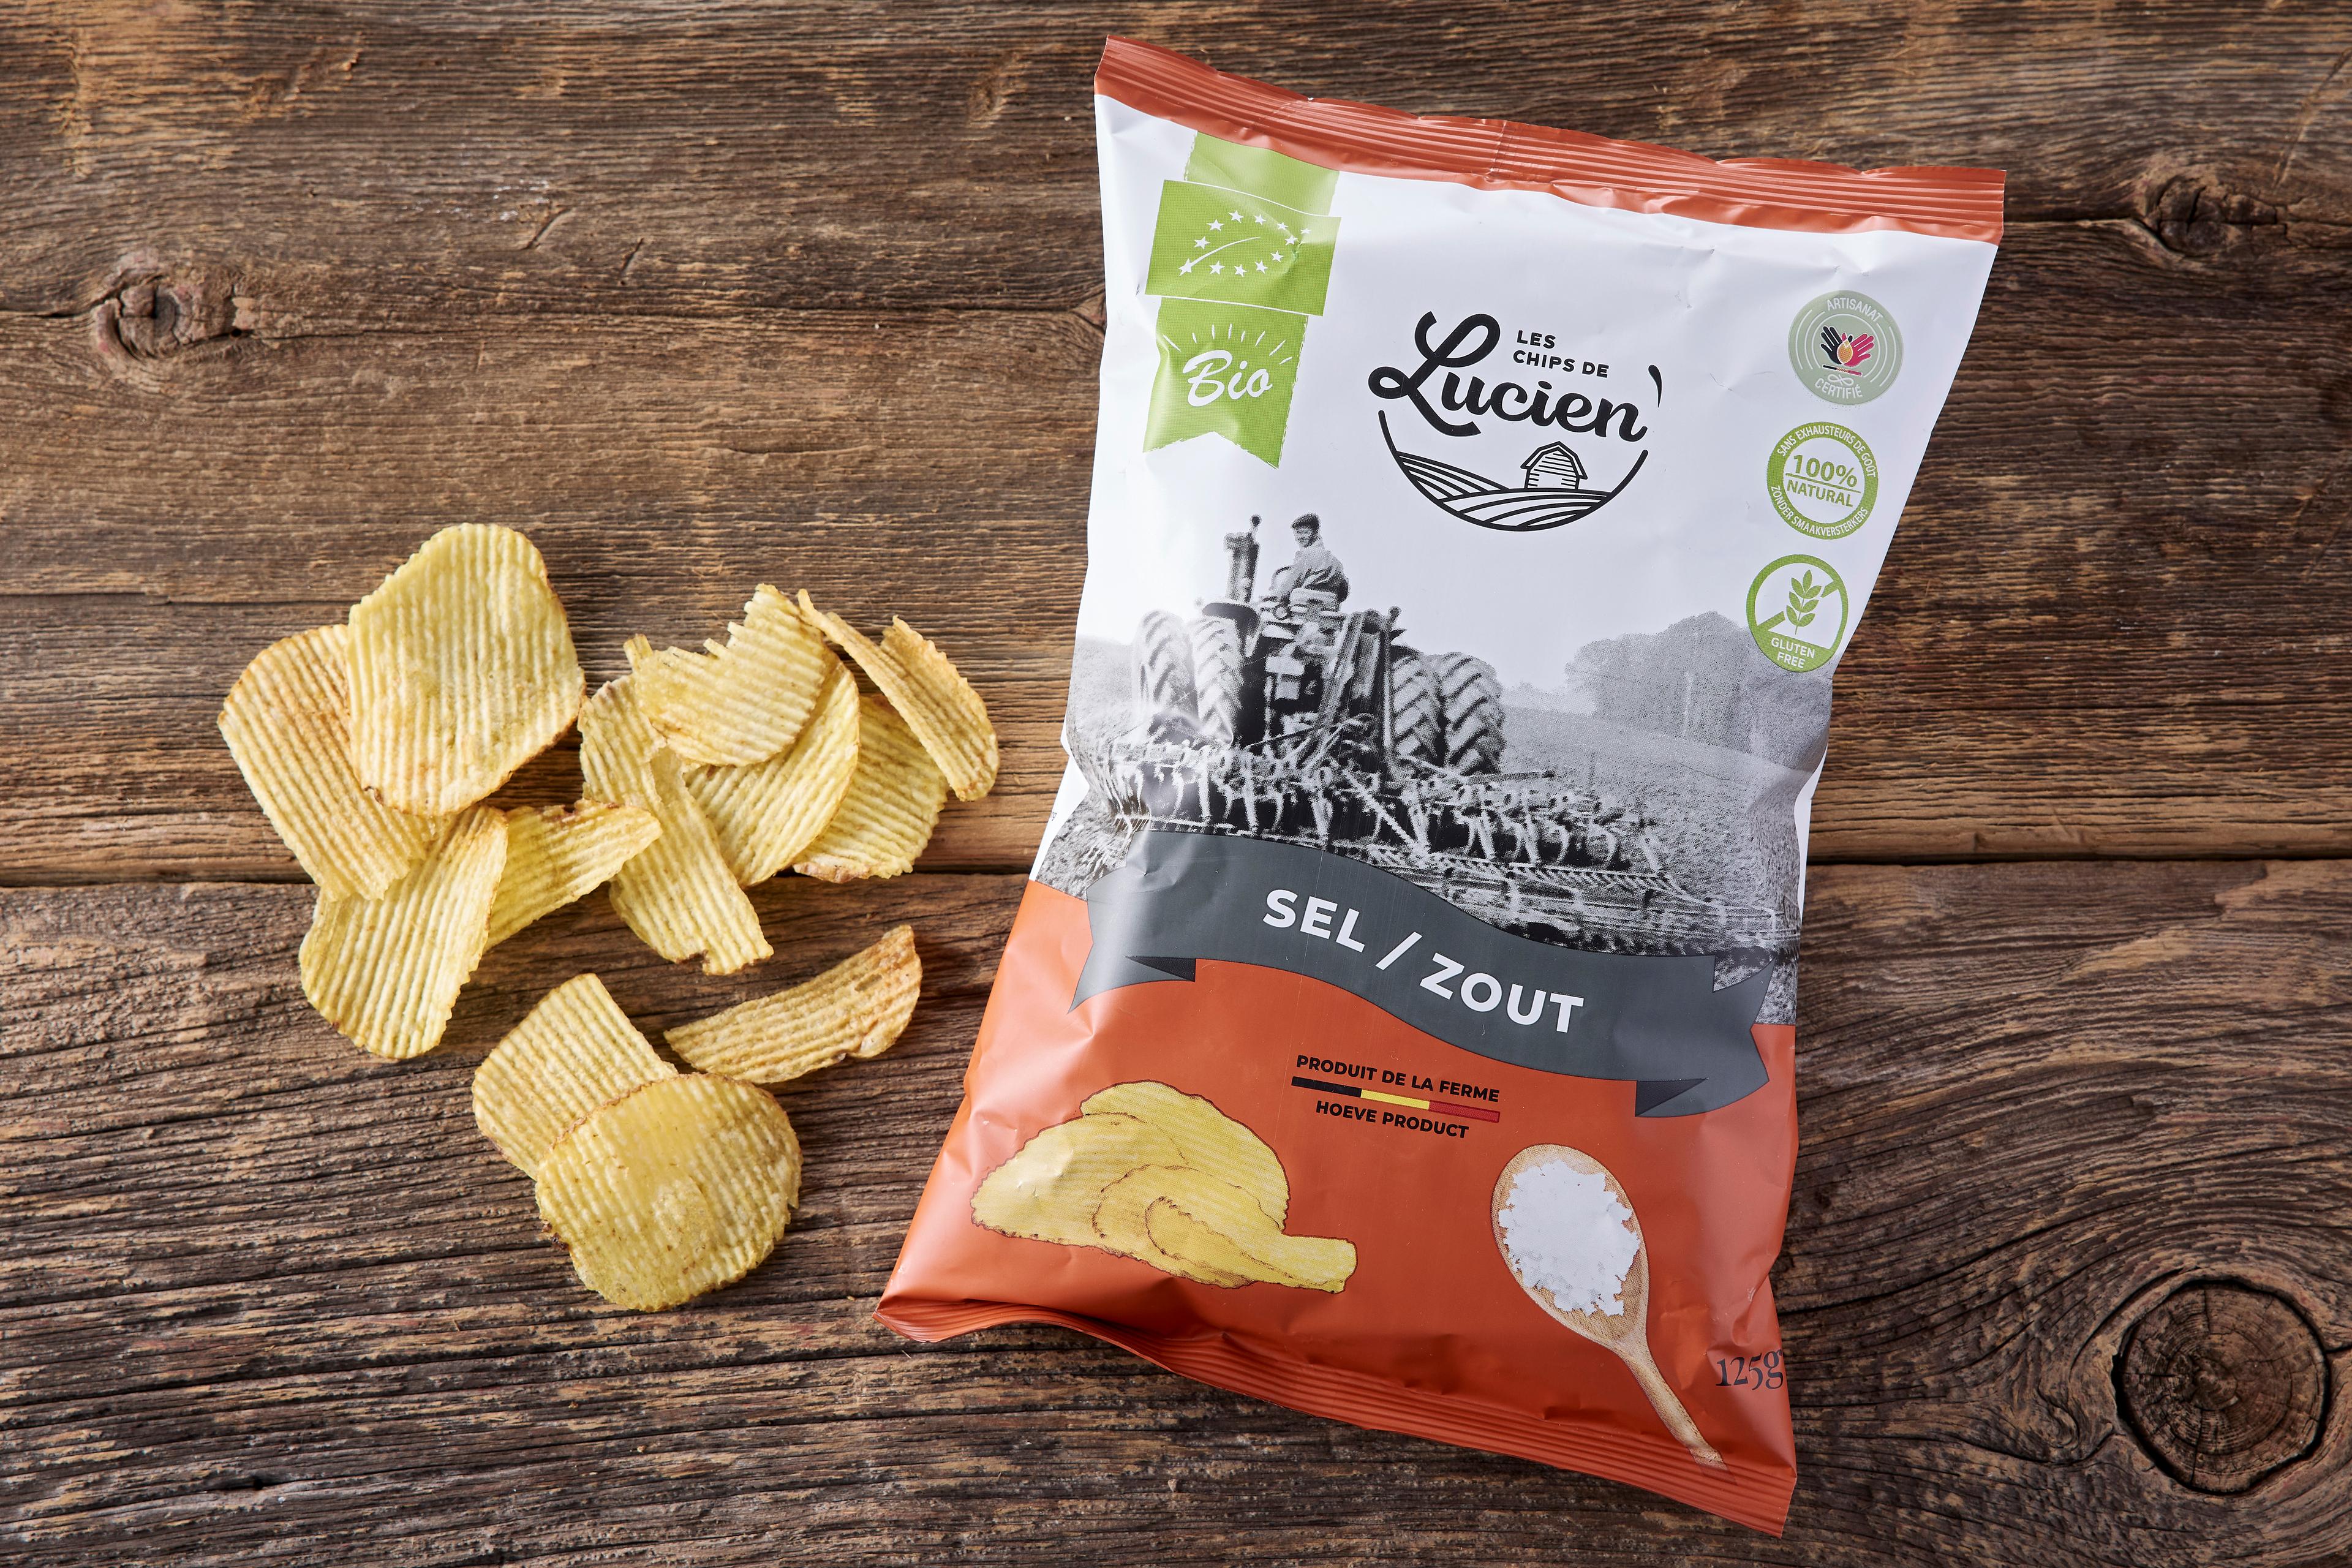 Zoute chips